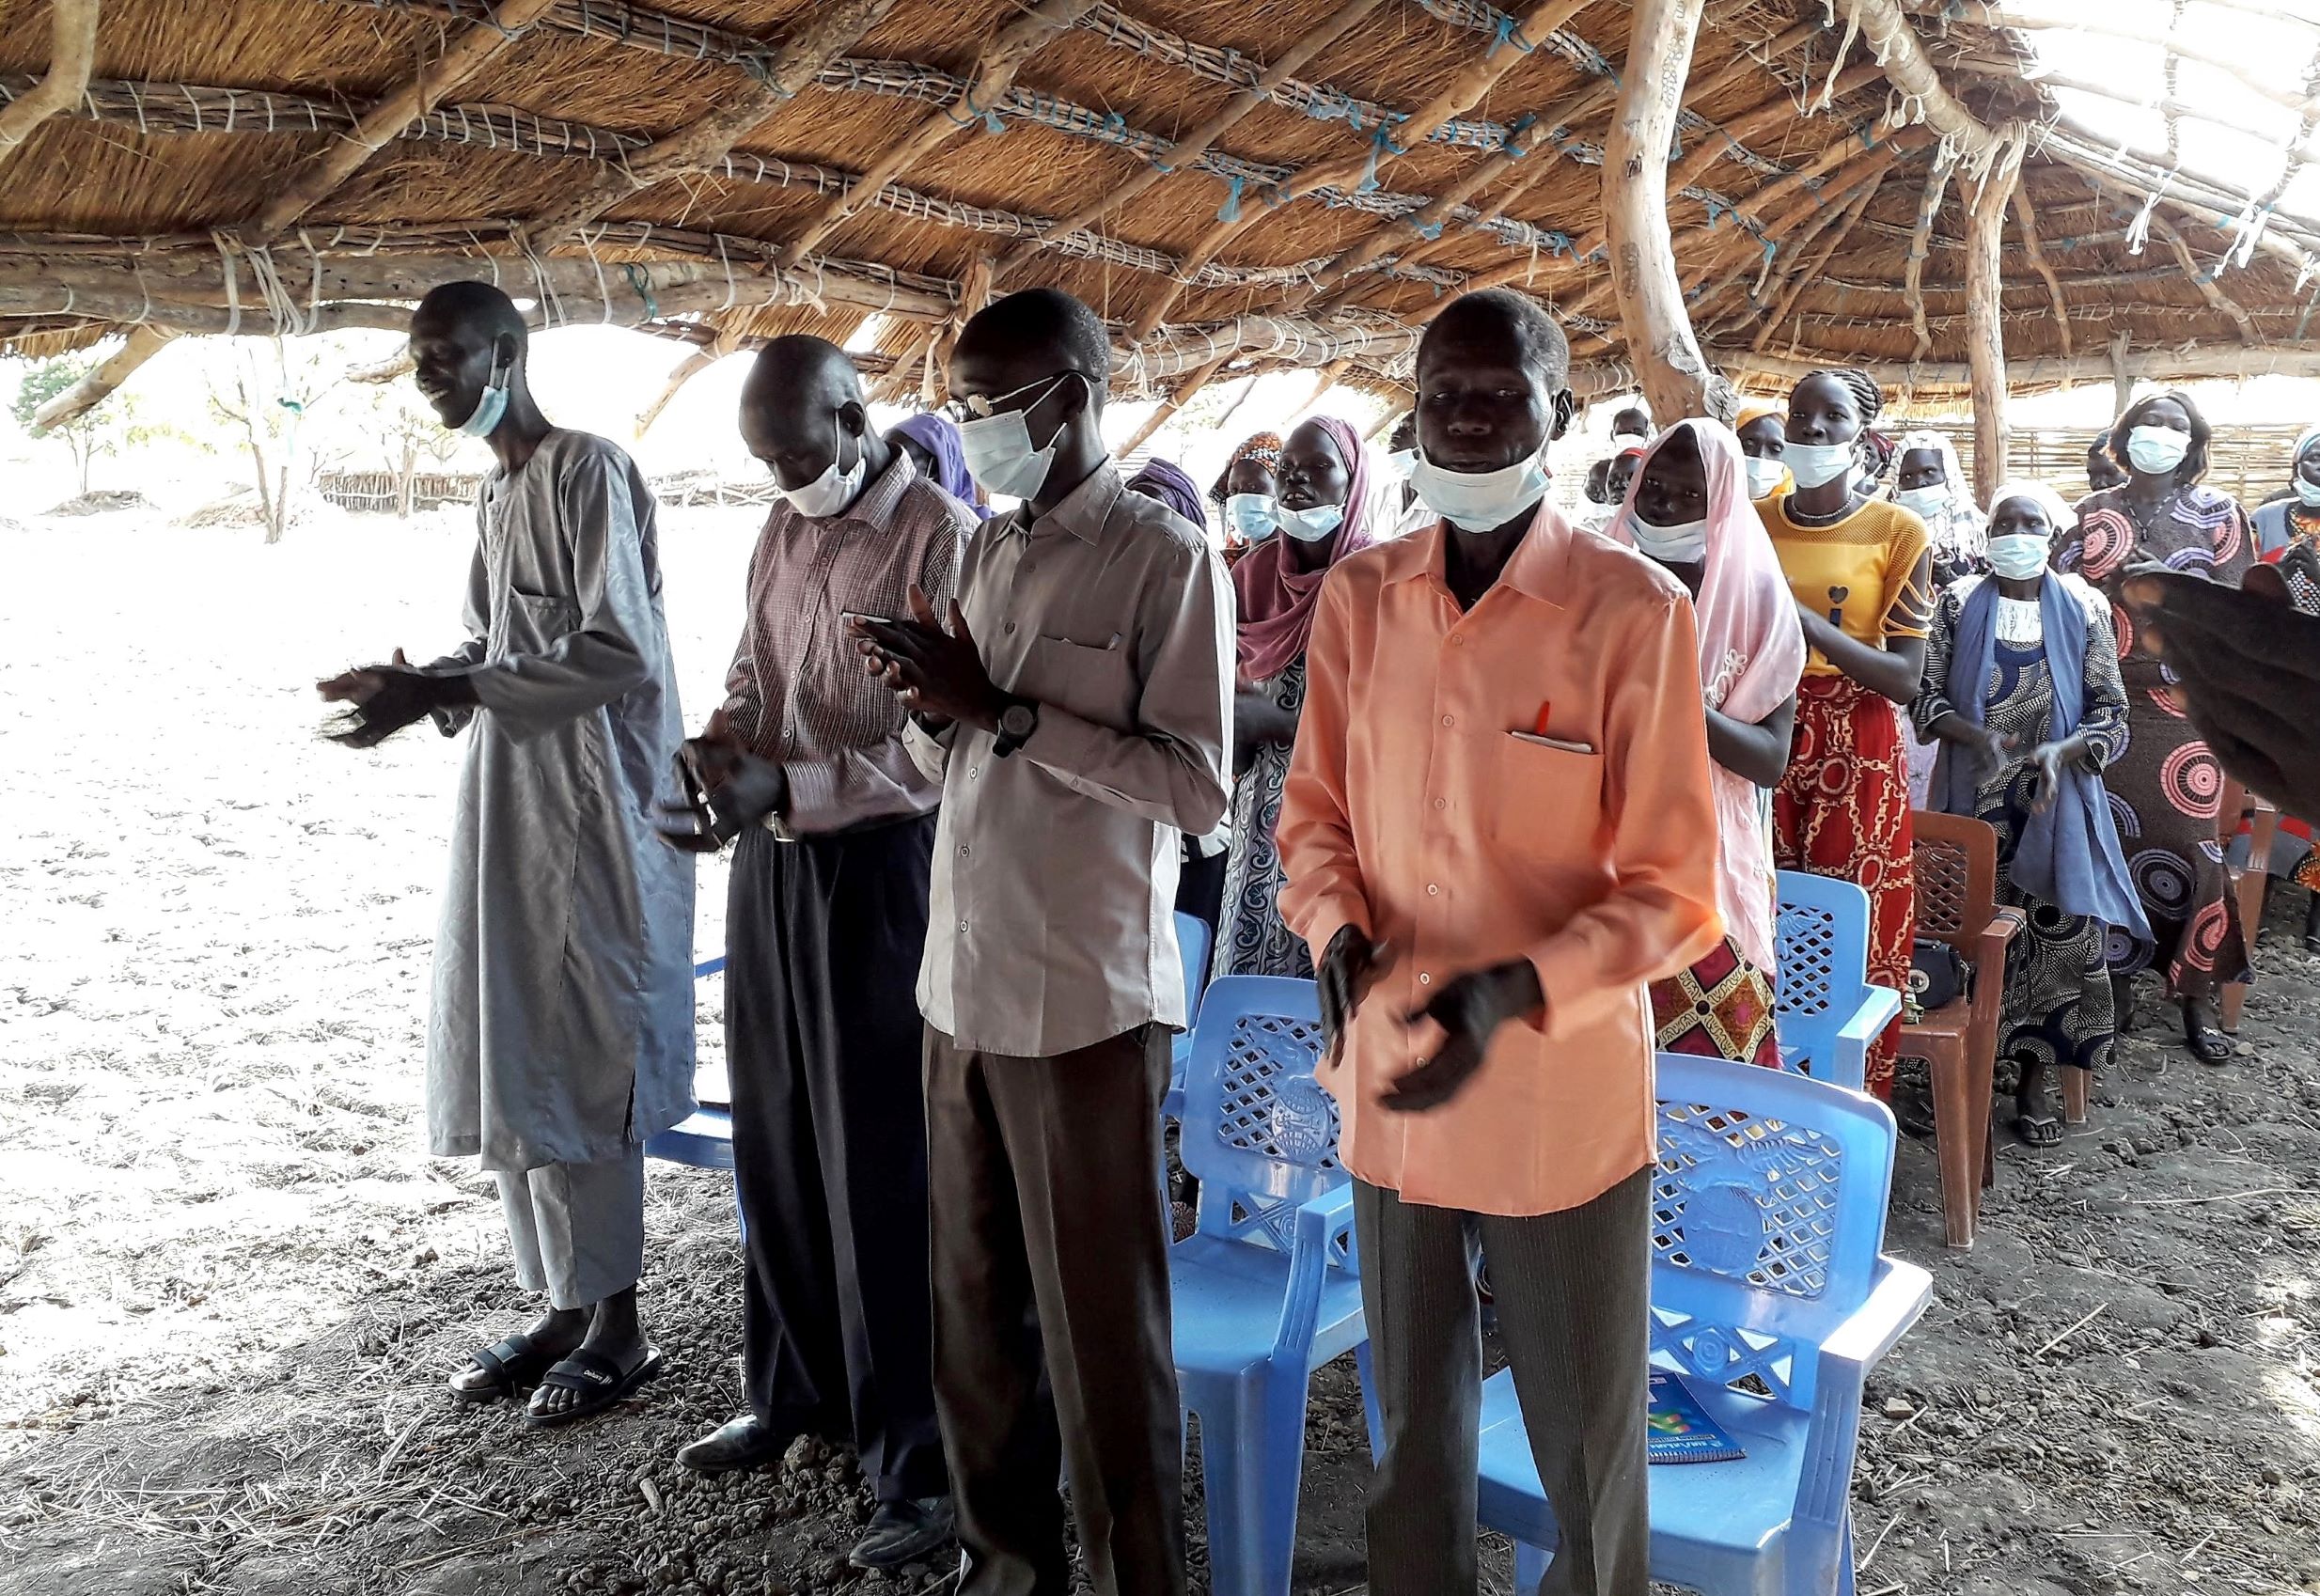 Participants in Abyei worship together.